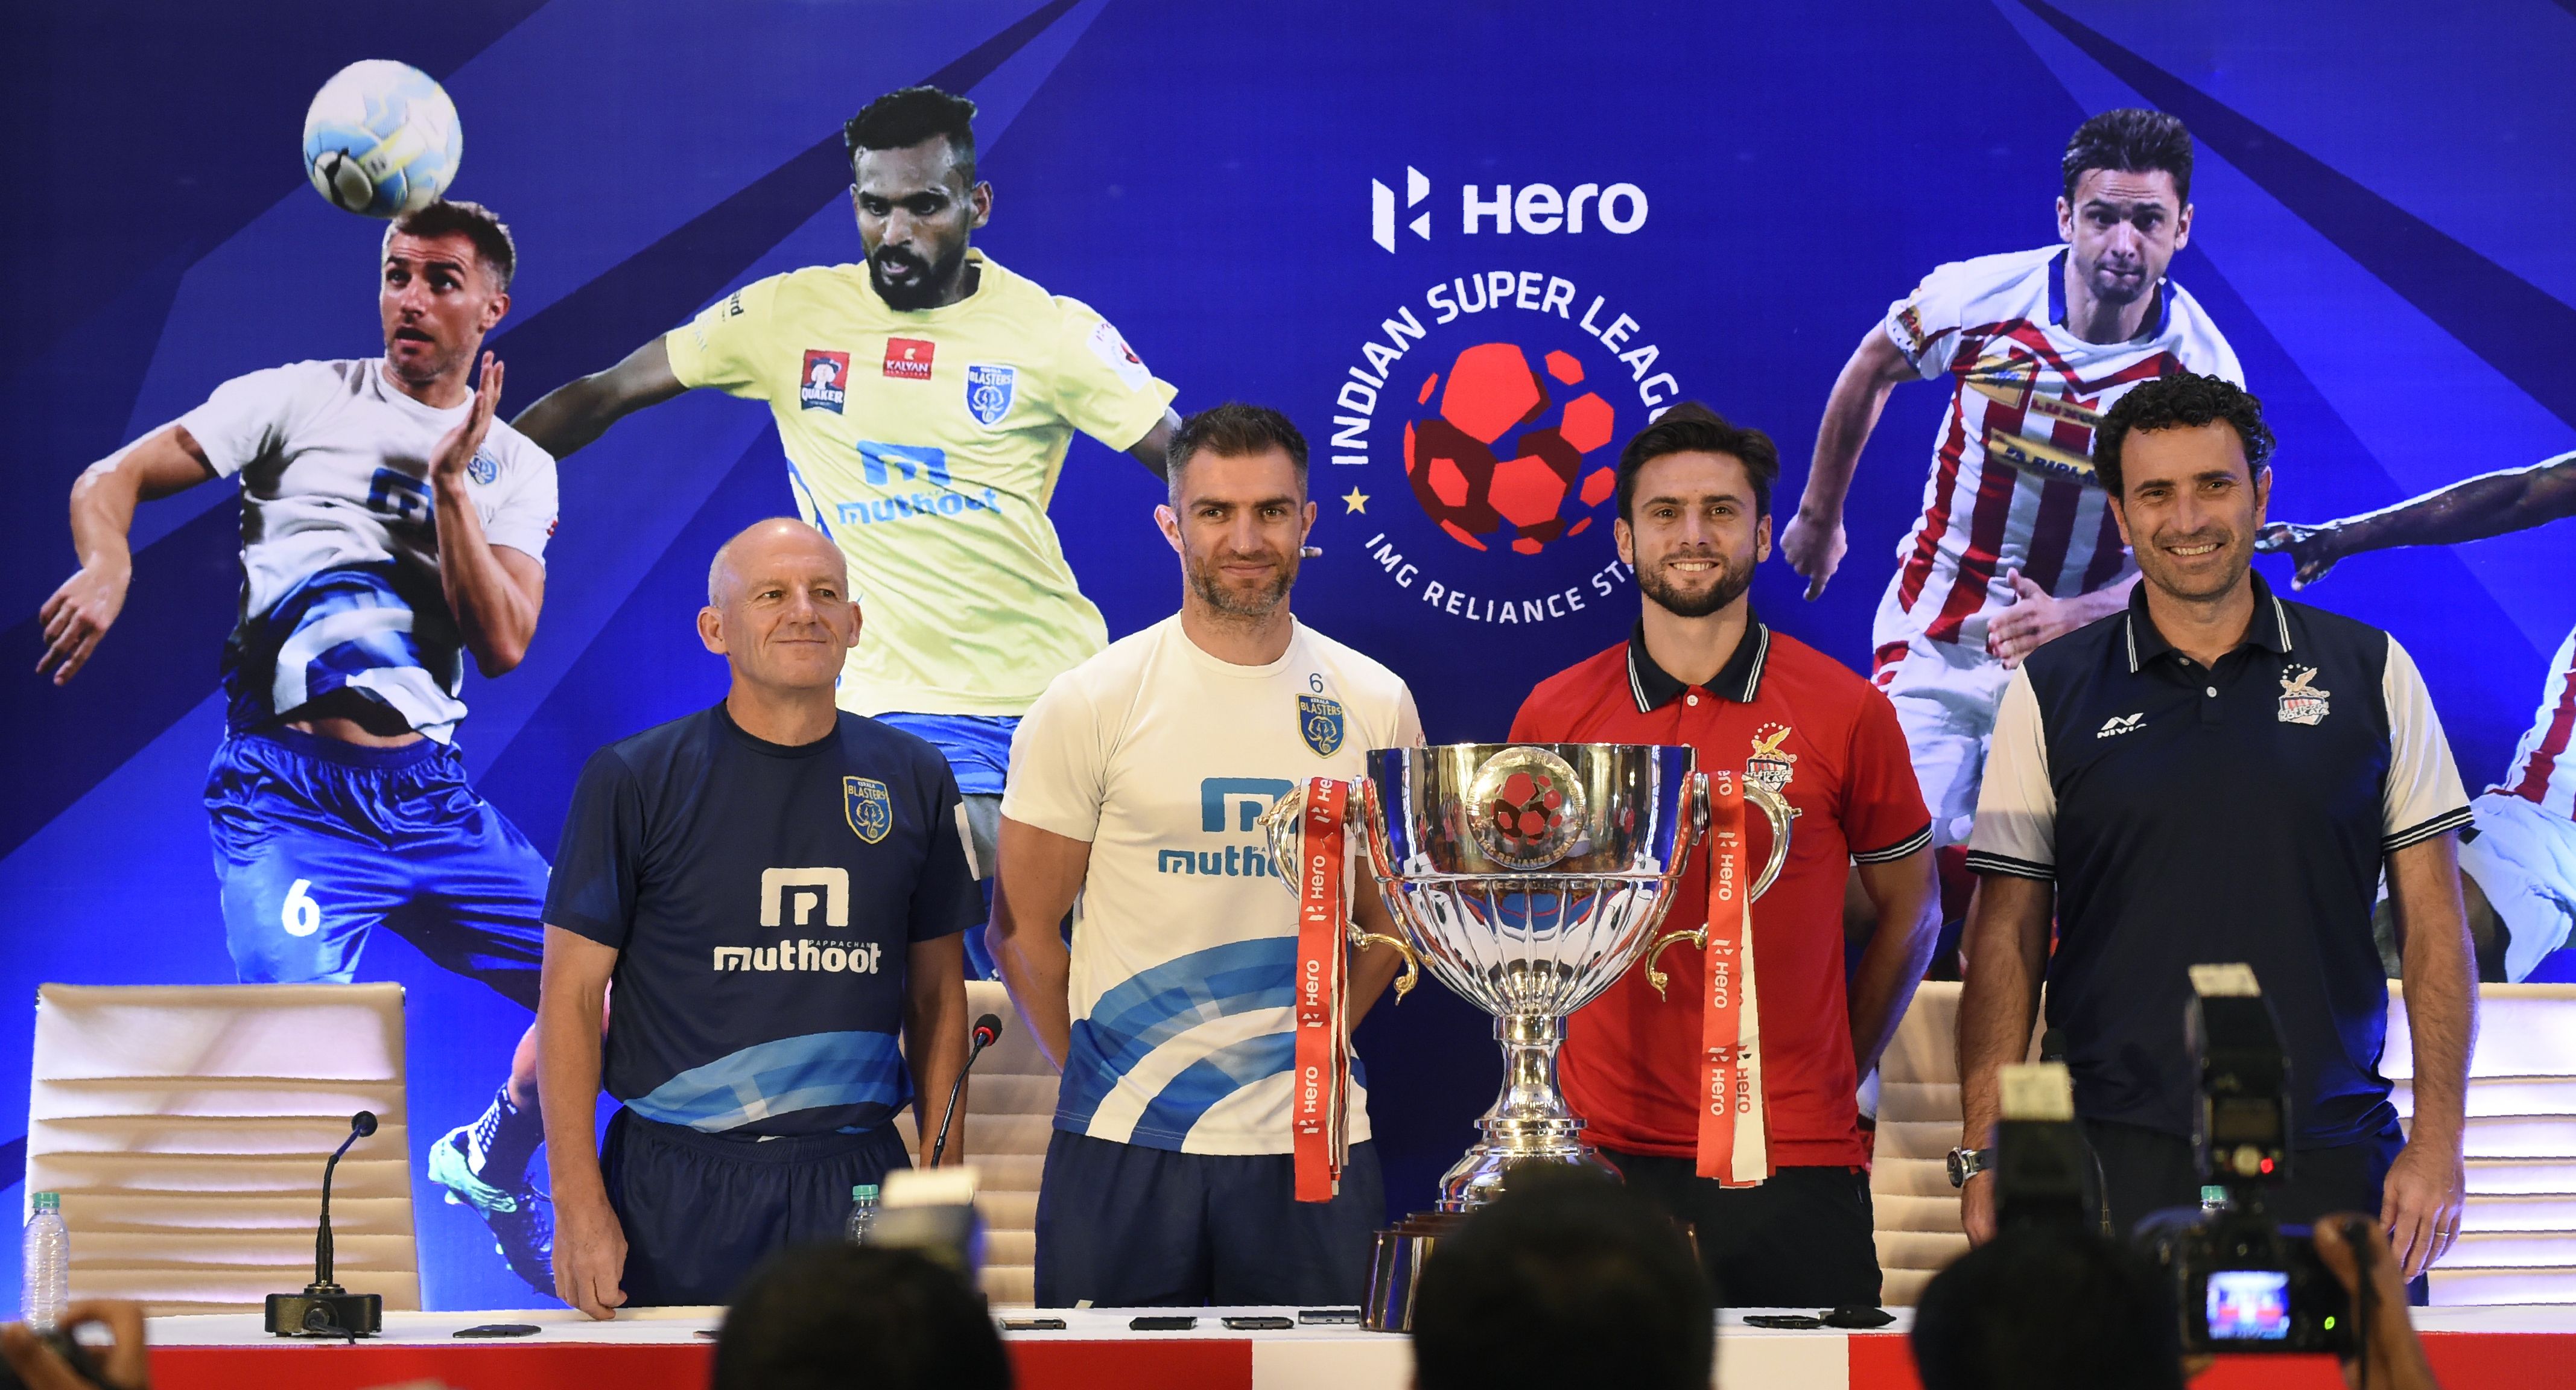 (L/R): Indian Super League (ISL) Kerala Blasters FC football team head coach Steve Coppell, Kerala defender Aaron Hughes,  Atlectico de Kolkata forward Helder Postiga and head coach Jose Francisco Molina pose with the ISL trophy after addressing a pre-match press conference in Kochi on December 17, 2016, ahead of the ISL final between Kerala Blasters FC and Atletico de Kolkata on December 18. ----IMAGE RESTRICTED TO EDITORIAL USE - STRICTLY NO COMMERCIAL USE----- / AFP / SAJJAD HUSSAIN        (Photo credit should read SAJJAD HUSSAIN/AFP/Getty Images)